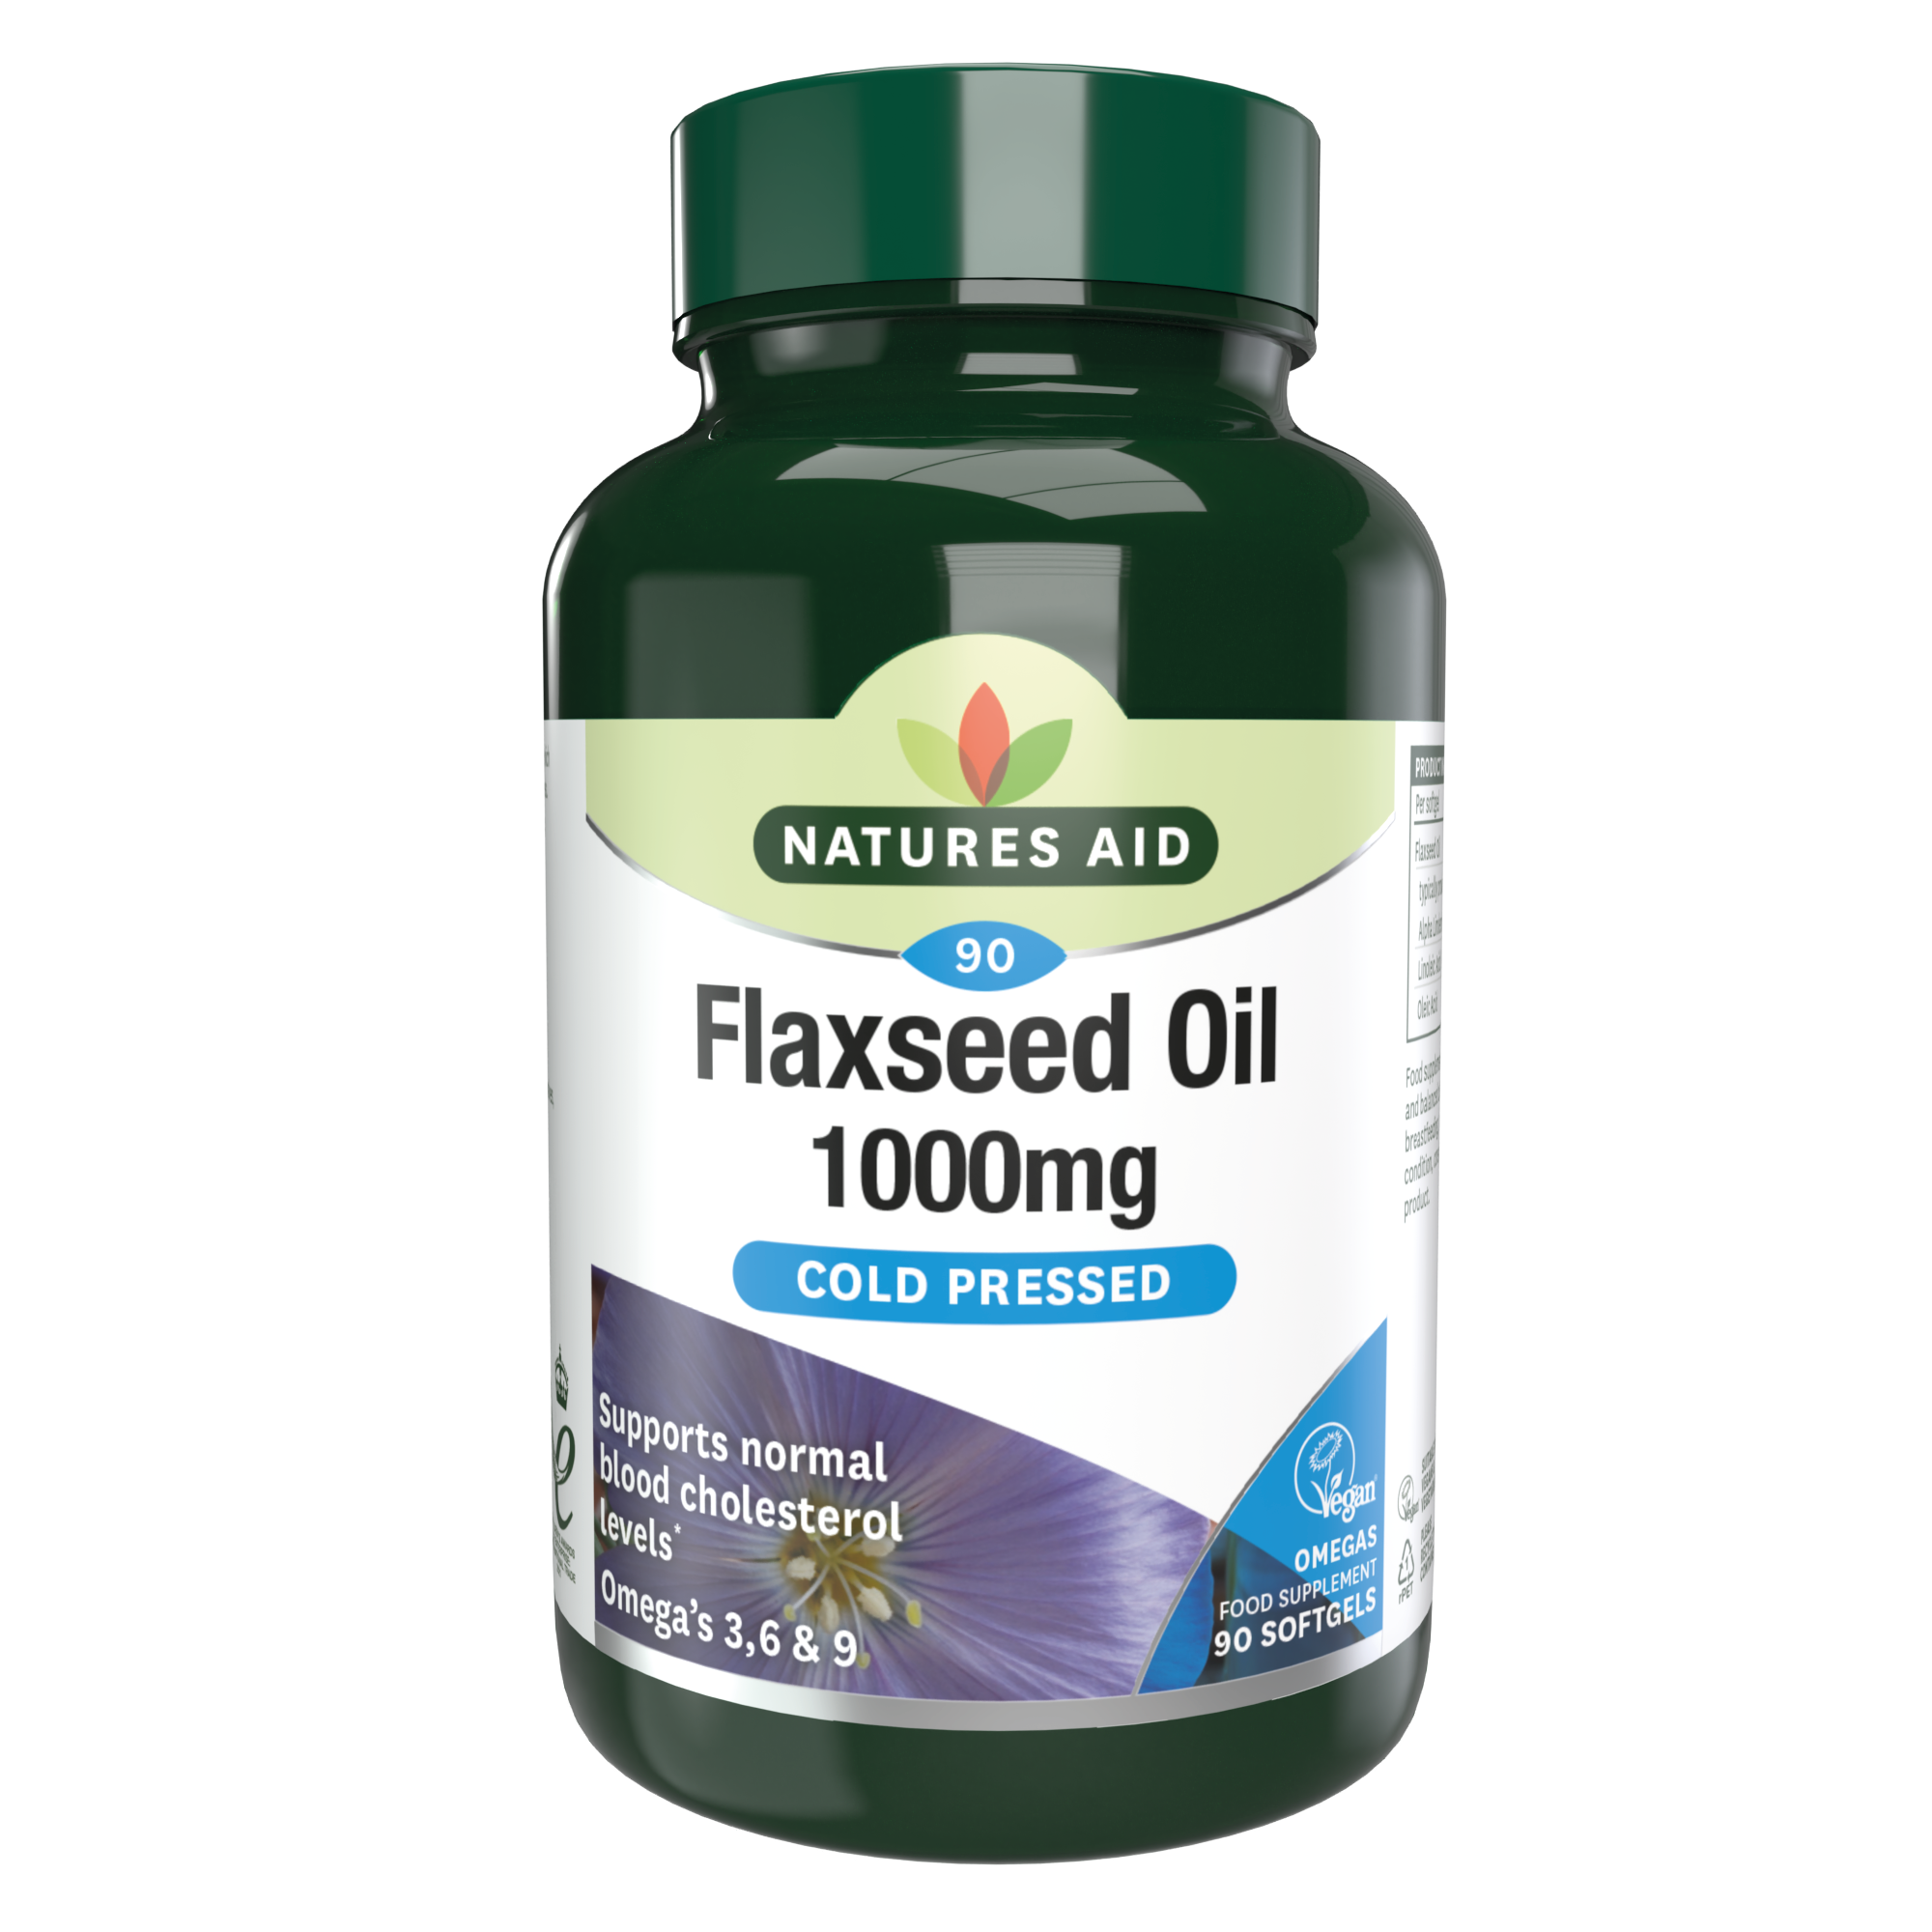 Natures Aid Flaxseed Oil 1000Mg 90